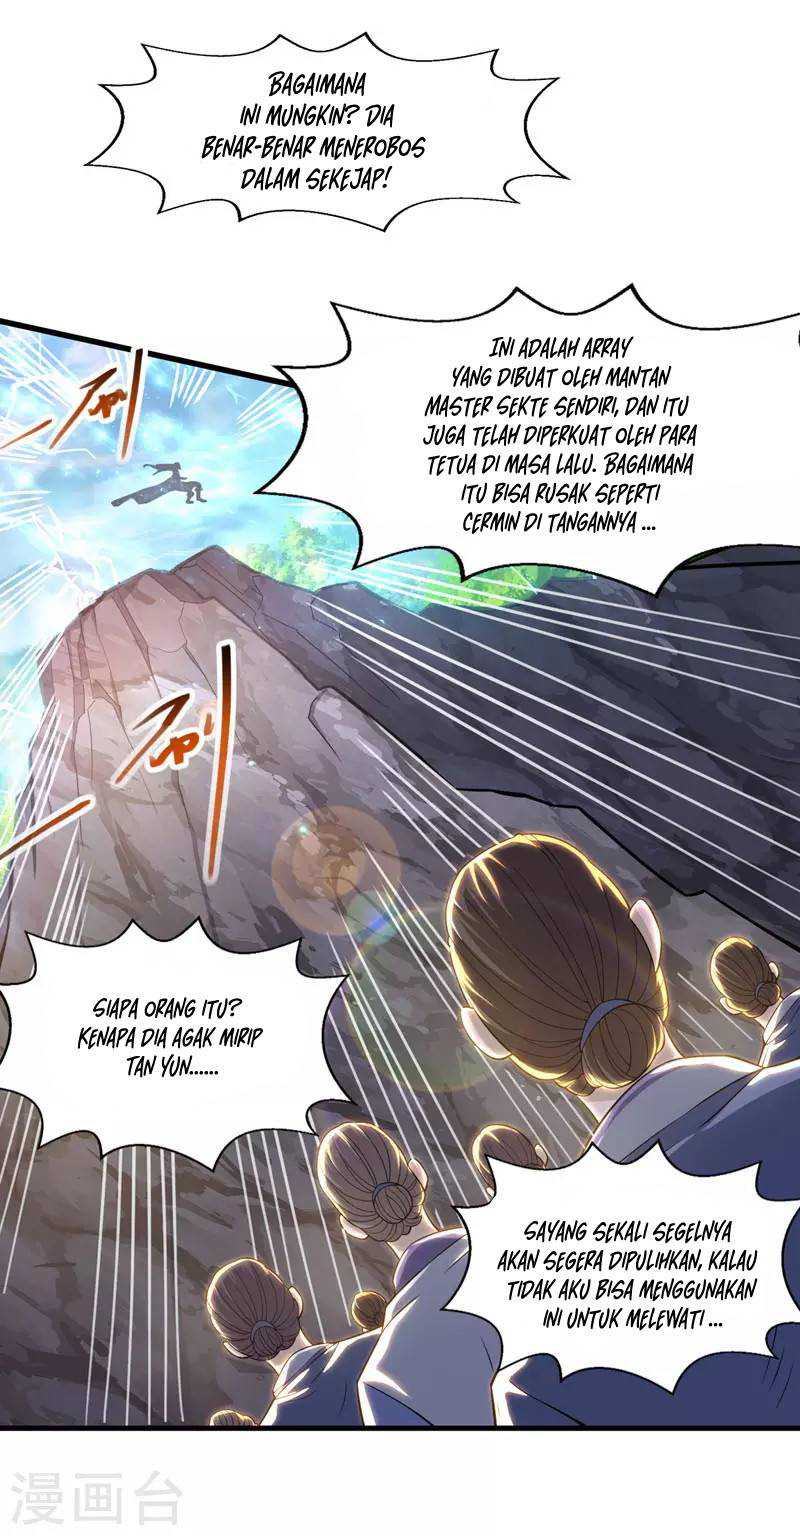 Against The Heaven Supreme (Heaven Guards) Chapter 58